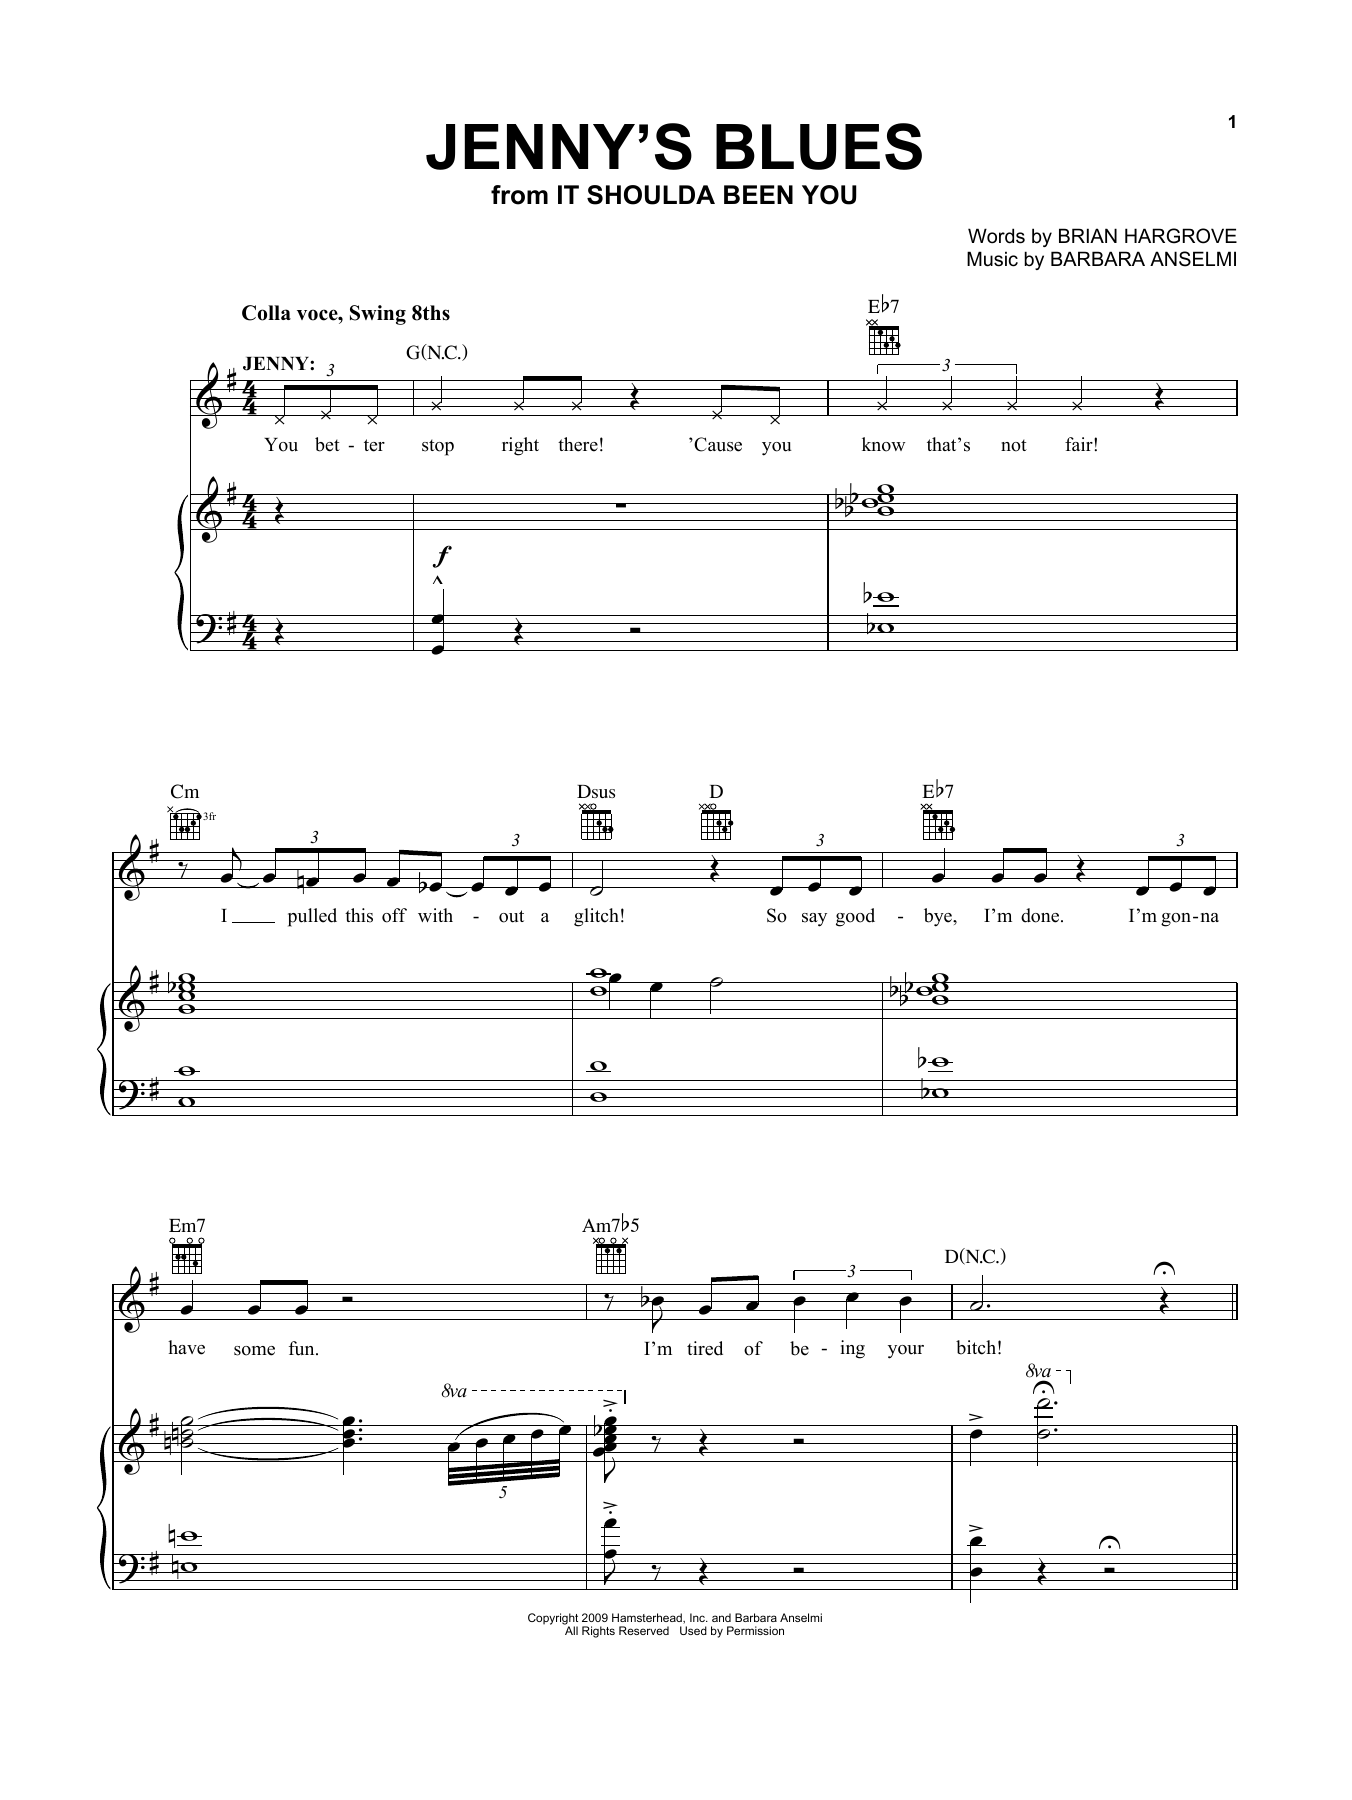 Download Barbara Anselmi and Brian Hargrove Jenny's Blues (from It Shoulda Been You Sheet Music